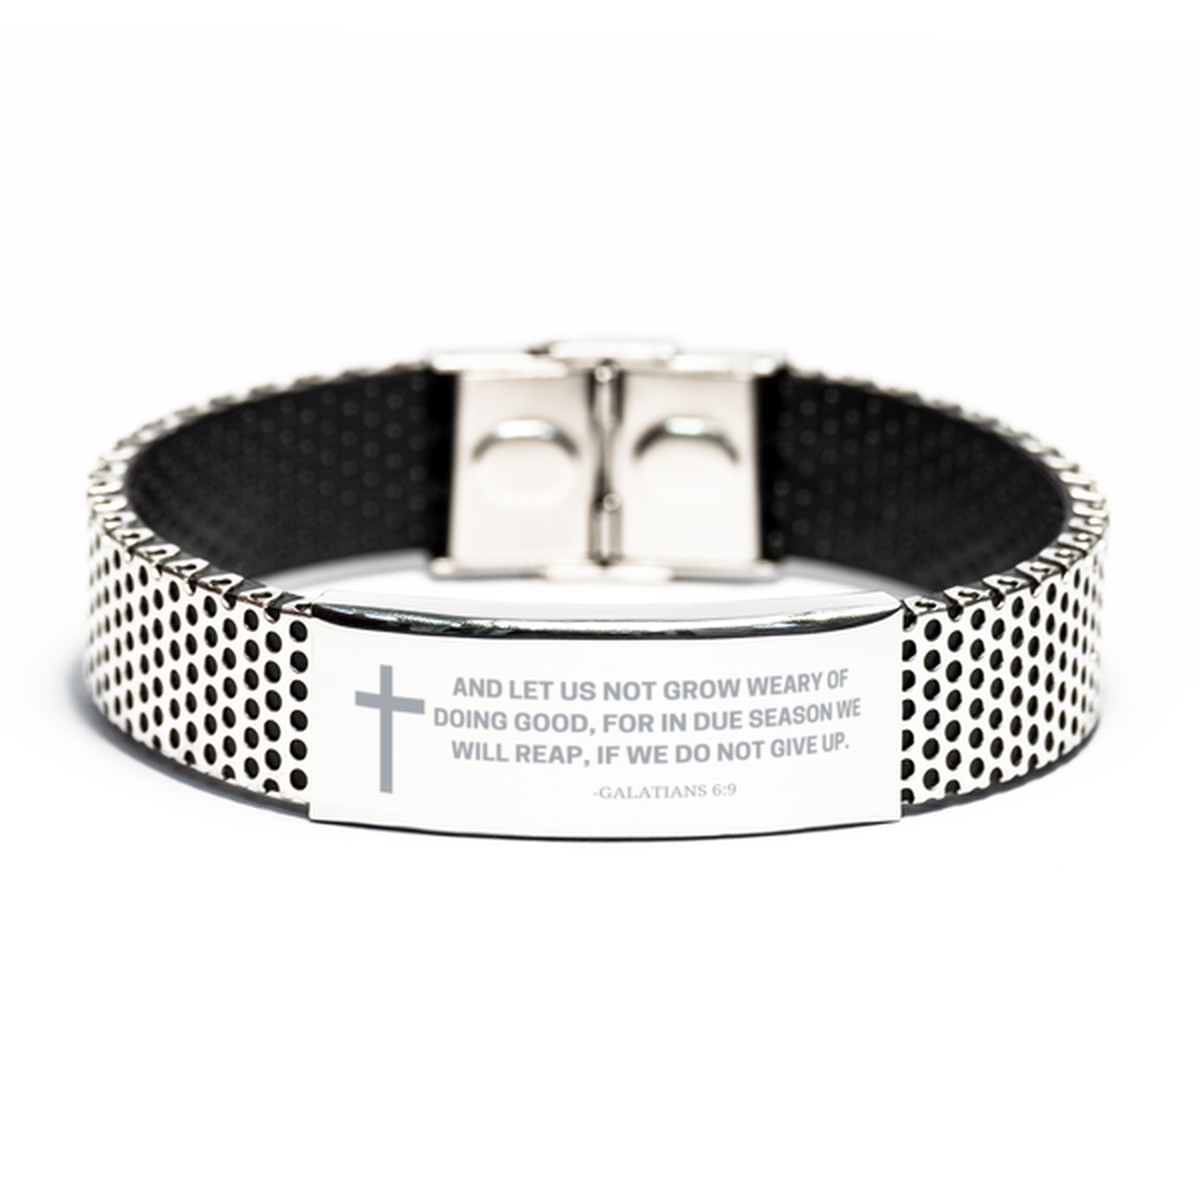 Baptism Gifts For Teenage Boys Girls, Christian Bible Verse Stainless Steel Bracelet, And let us not grow weary, Catholic Confirmation Gifts for Son, Godson, Grandson, Nephew